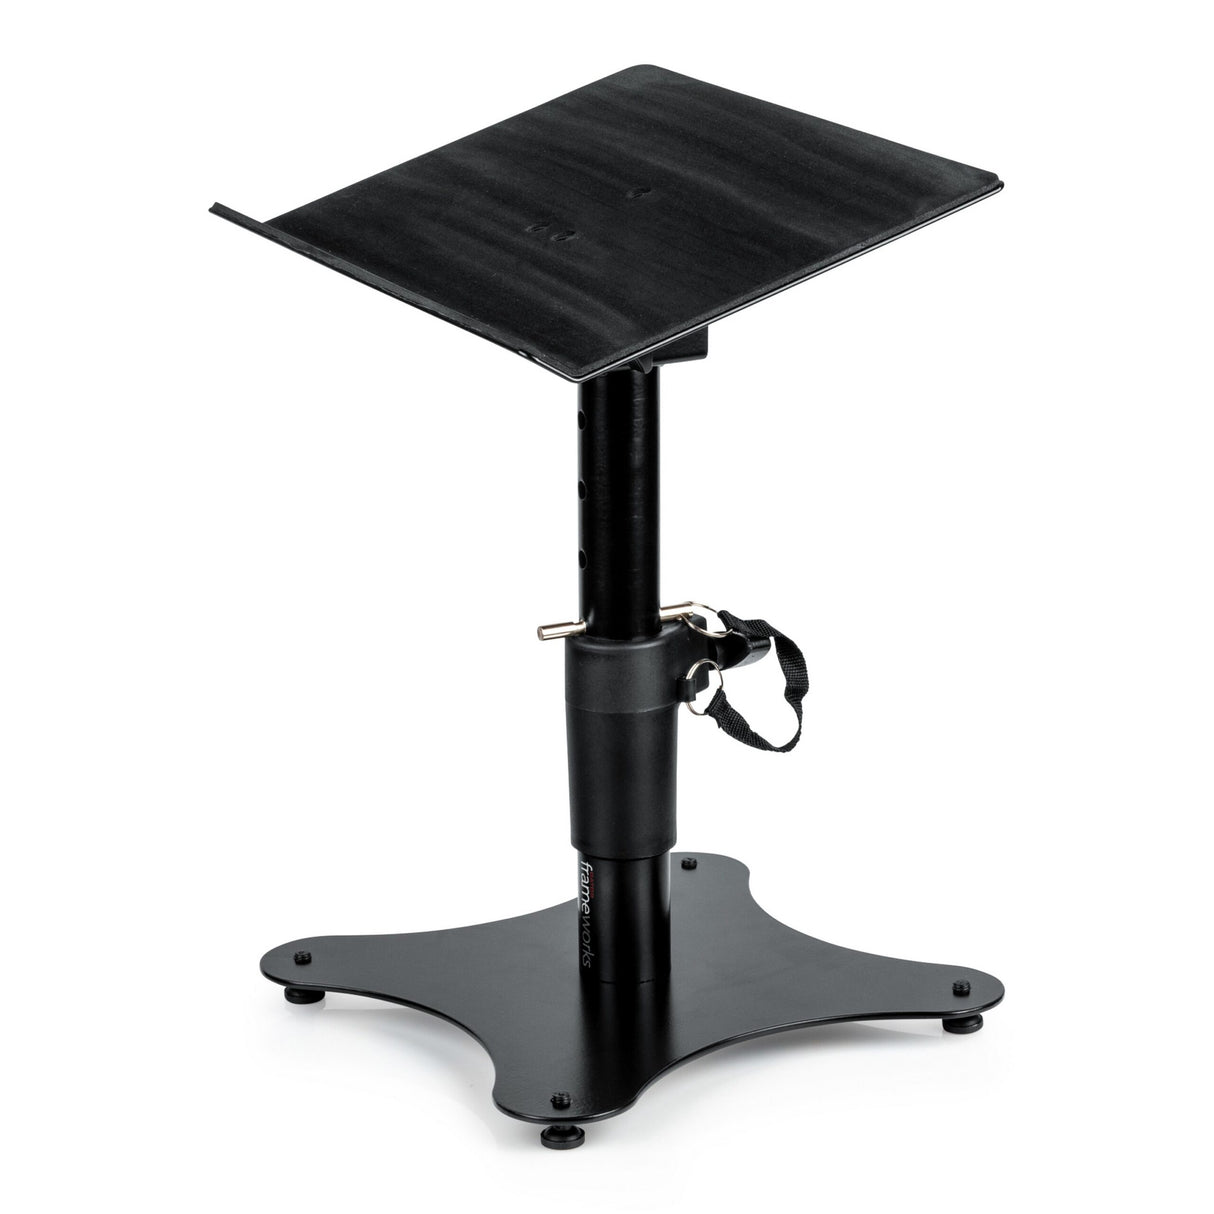 Gator GFWLAPTOP2000 Desktop Laptop and Accessory Stand